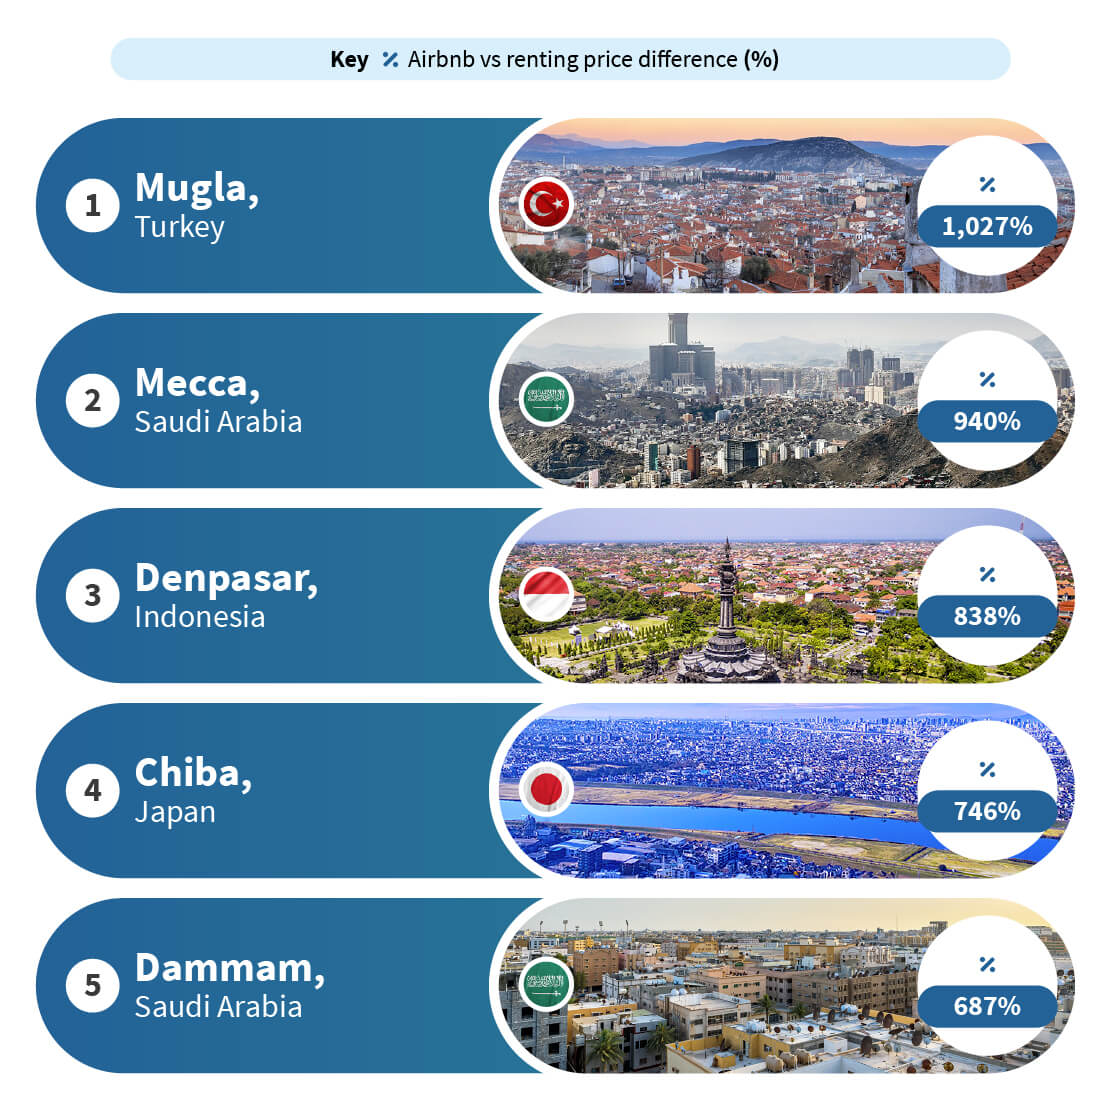 Top 5 cities with the biggest gap between rent and Airbnb prices